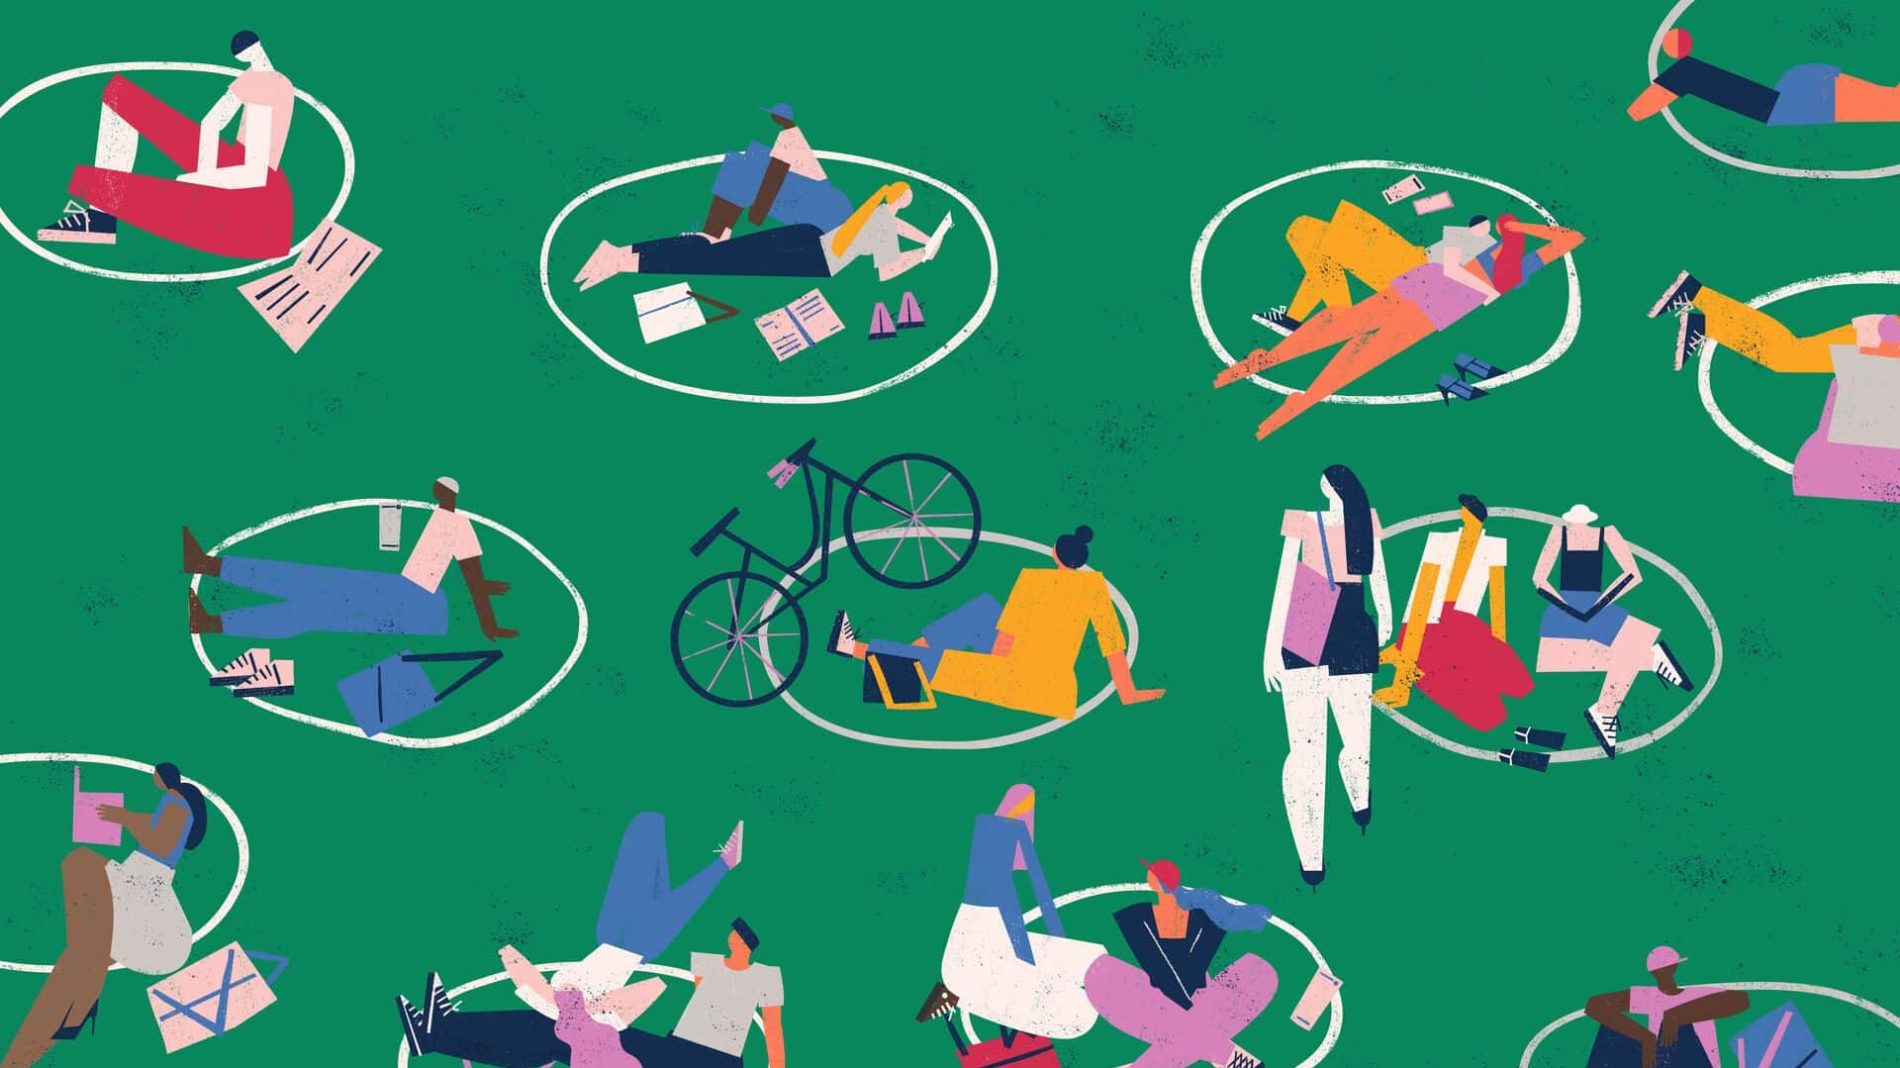 illustration of individuals and small groups of people sitting and lying on the grass following covid19 social distancing guidelines